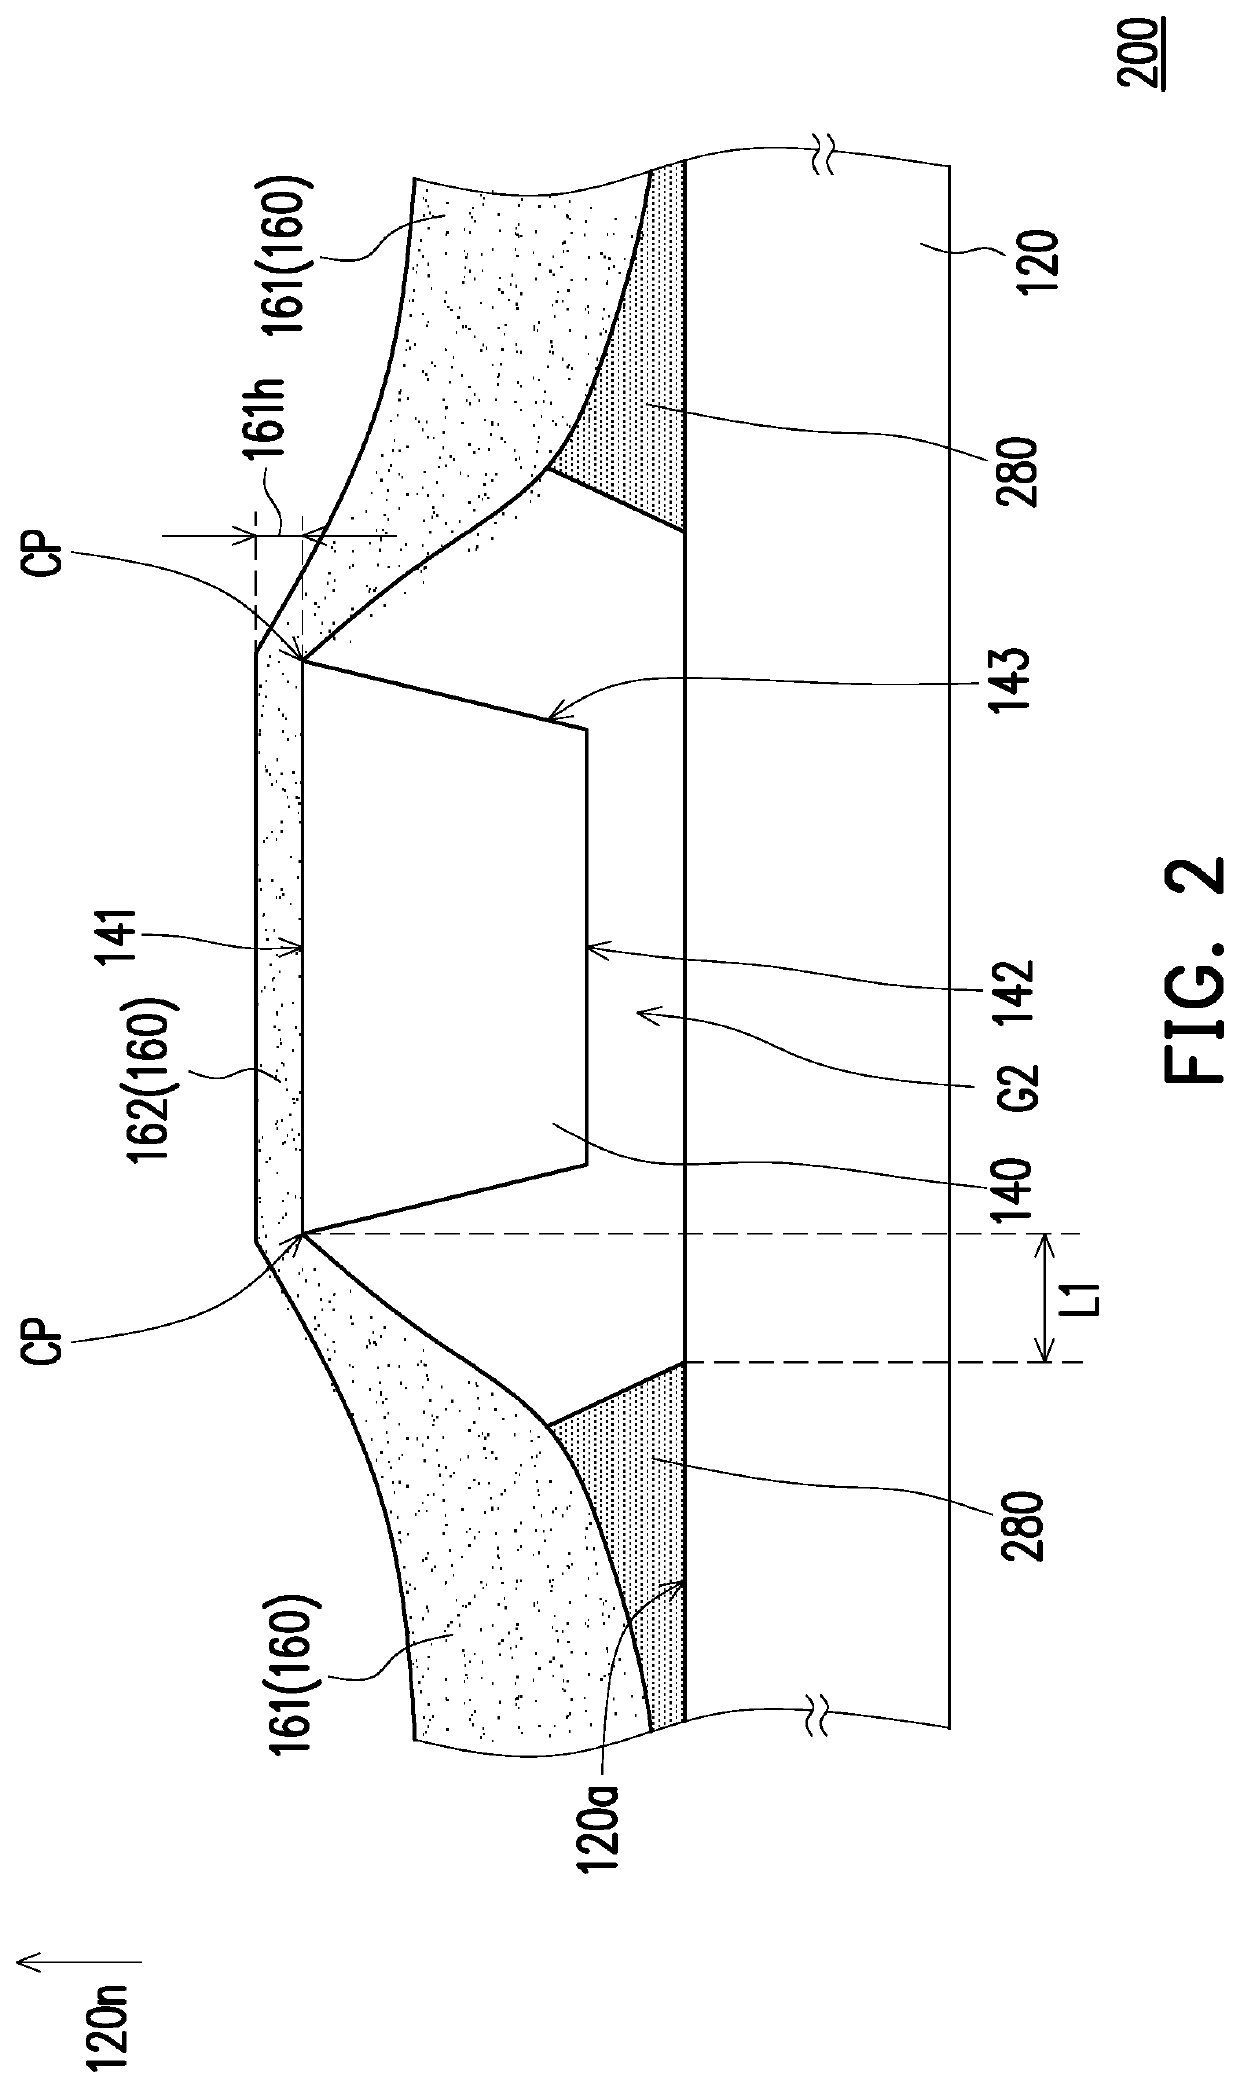 Structure with micro device